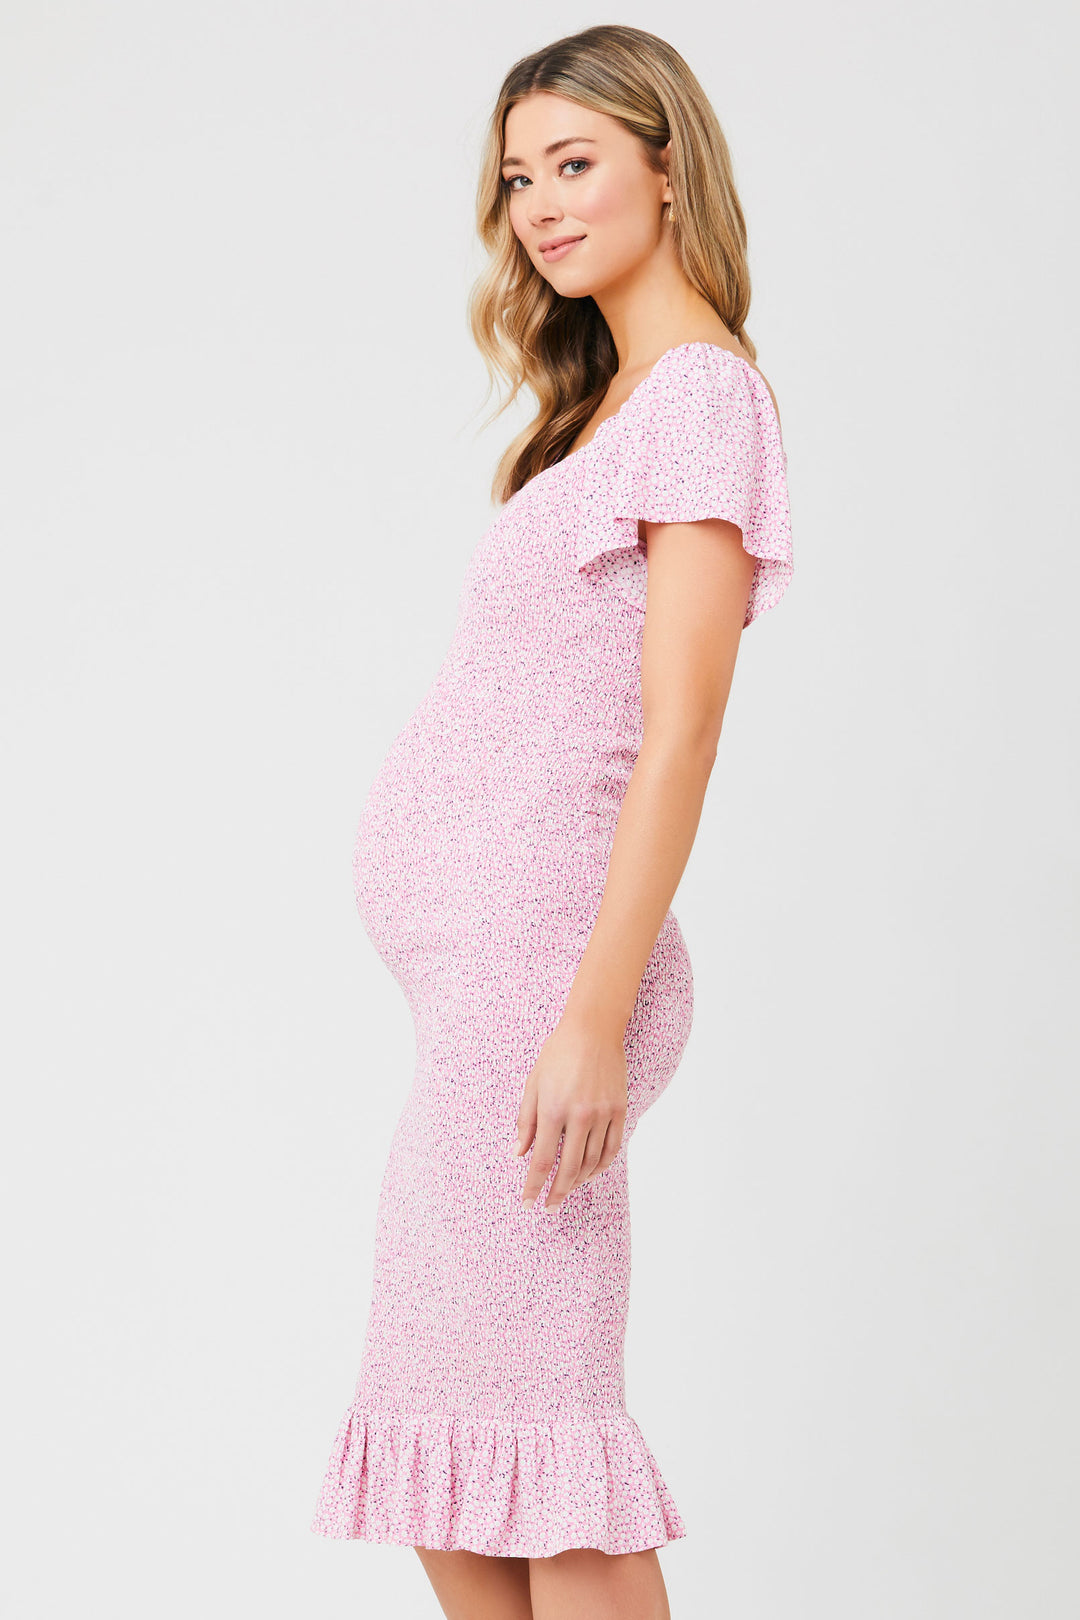 Selma Fitted Maternity and Nursing Dress in Pink